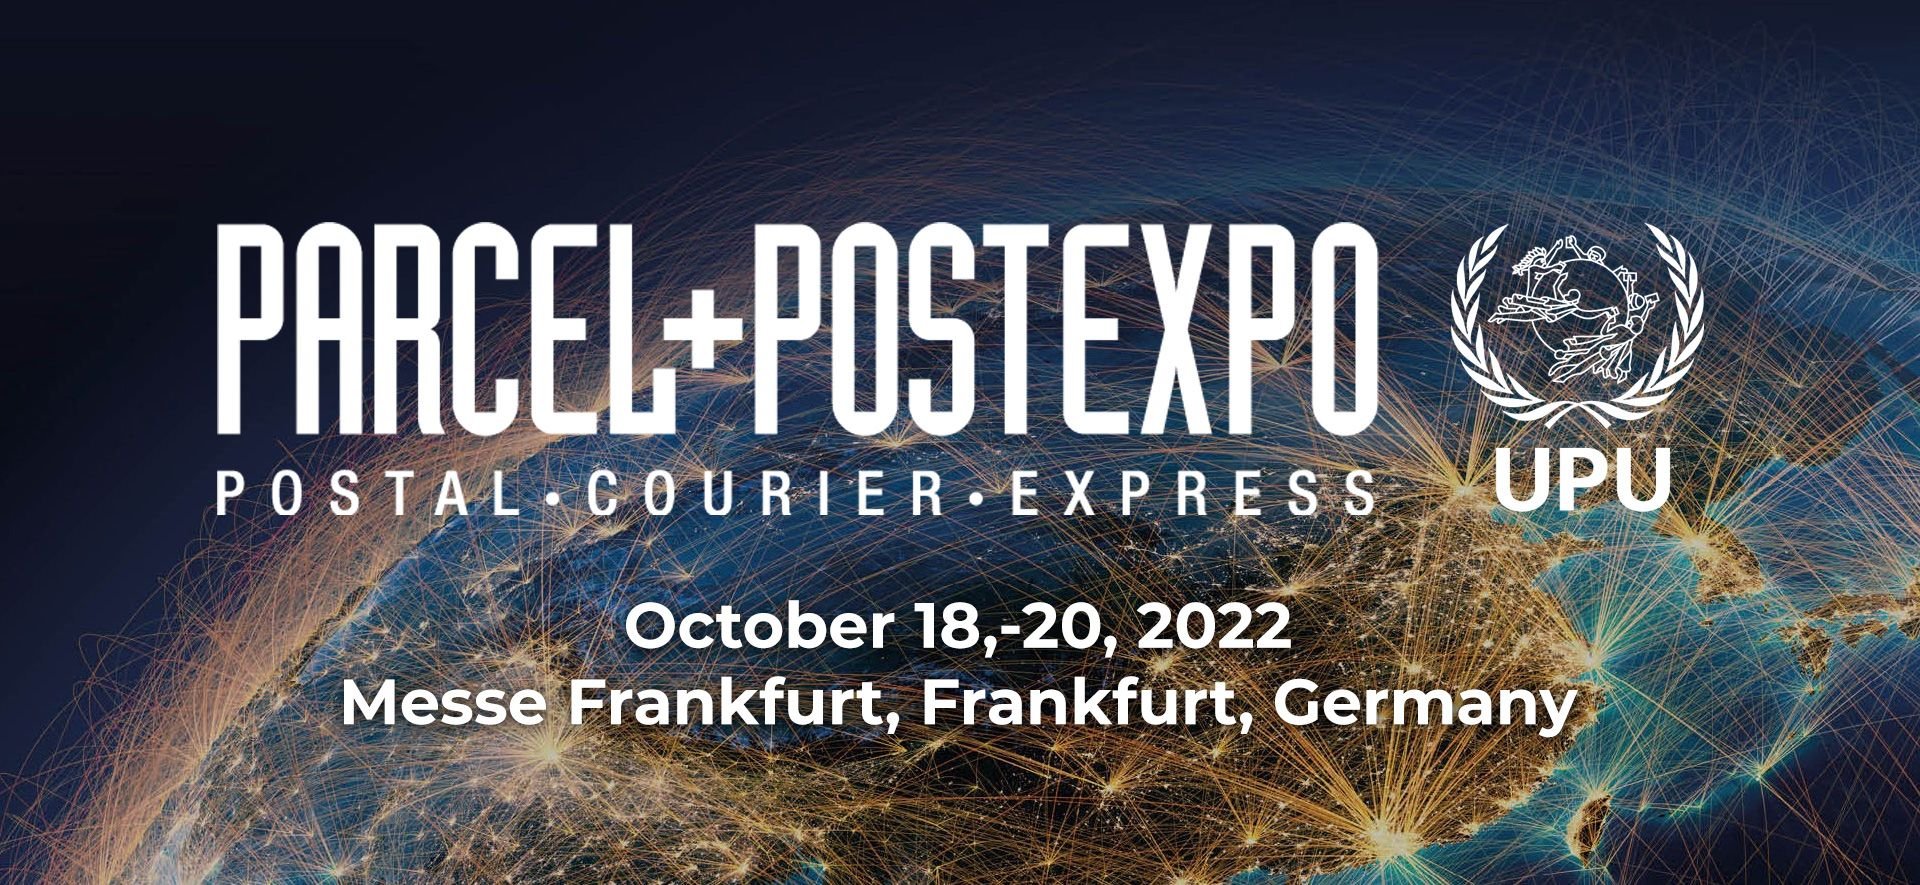 Postal-Exhibition-and-Conference-cover.jpg